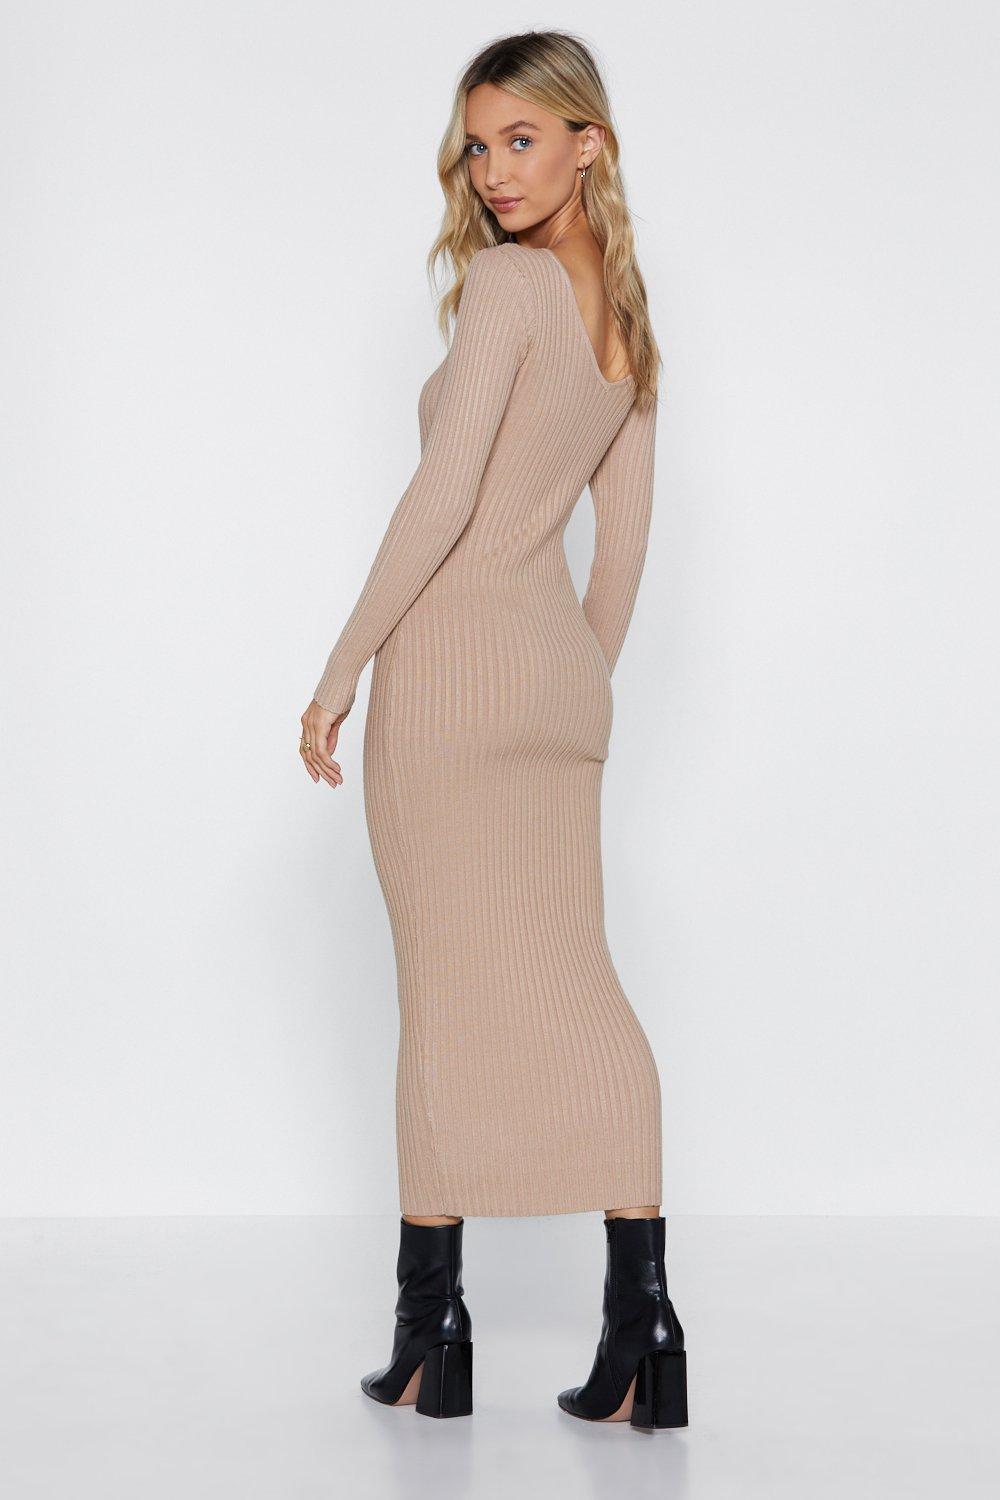 It's Knit the End of the World Midi Dress | Nasty Gal